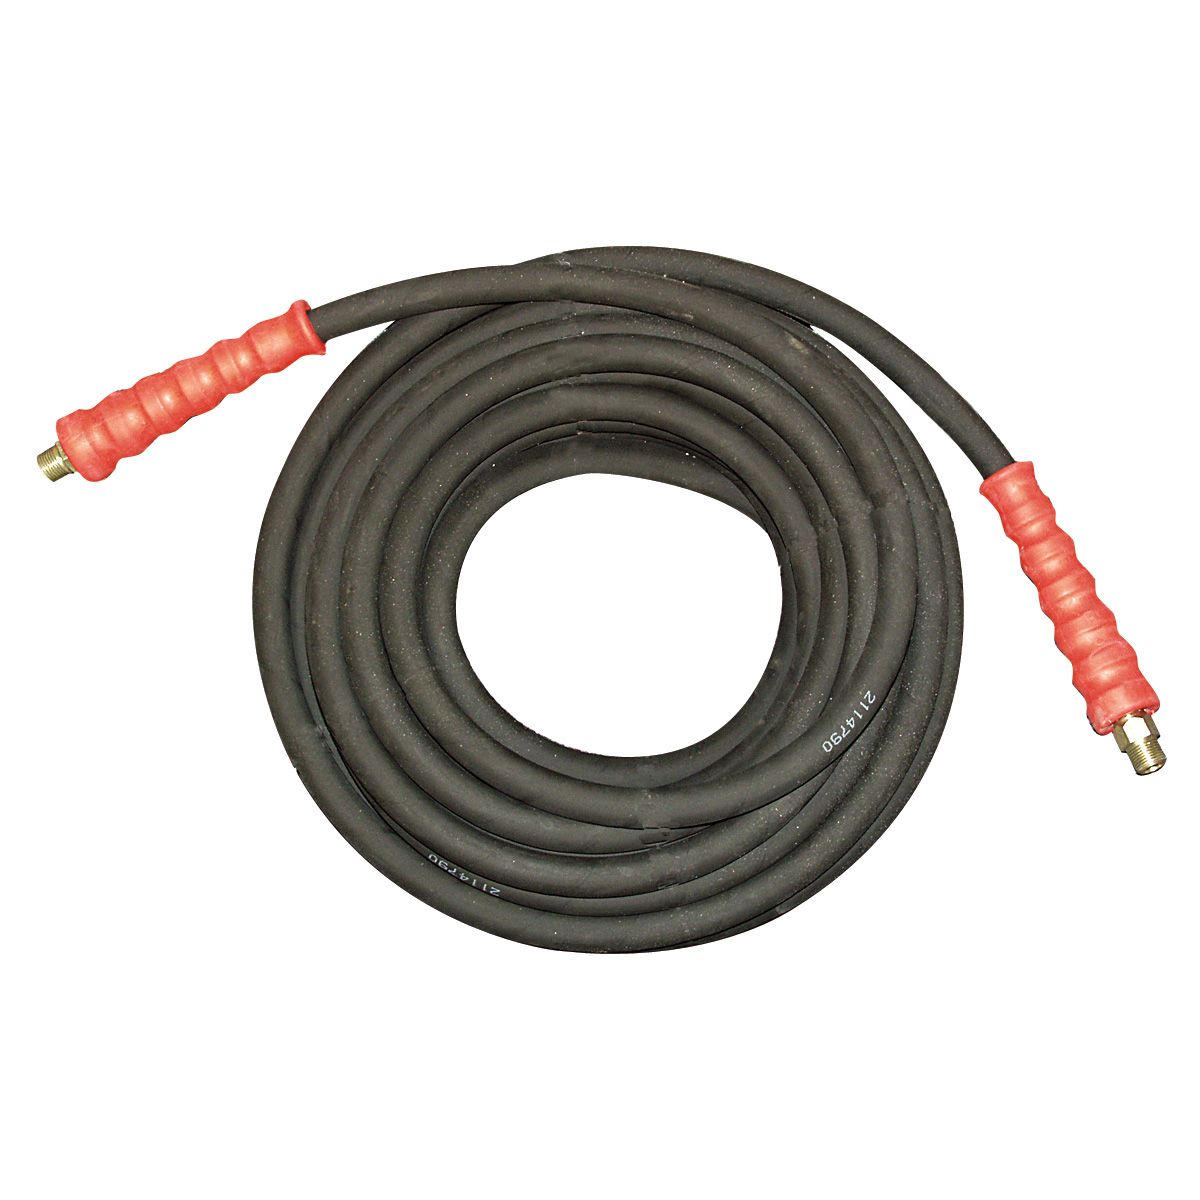 1/2x25 Ft Double Hose Assembly 111185 2000 PSI Greenlee 